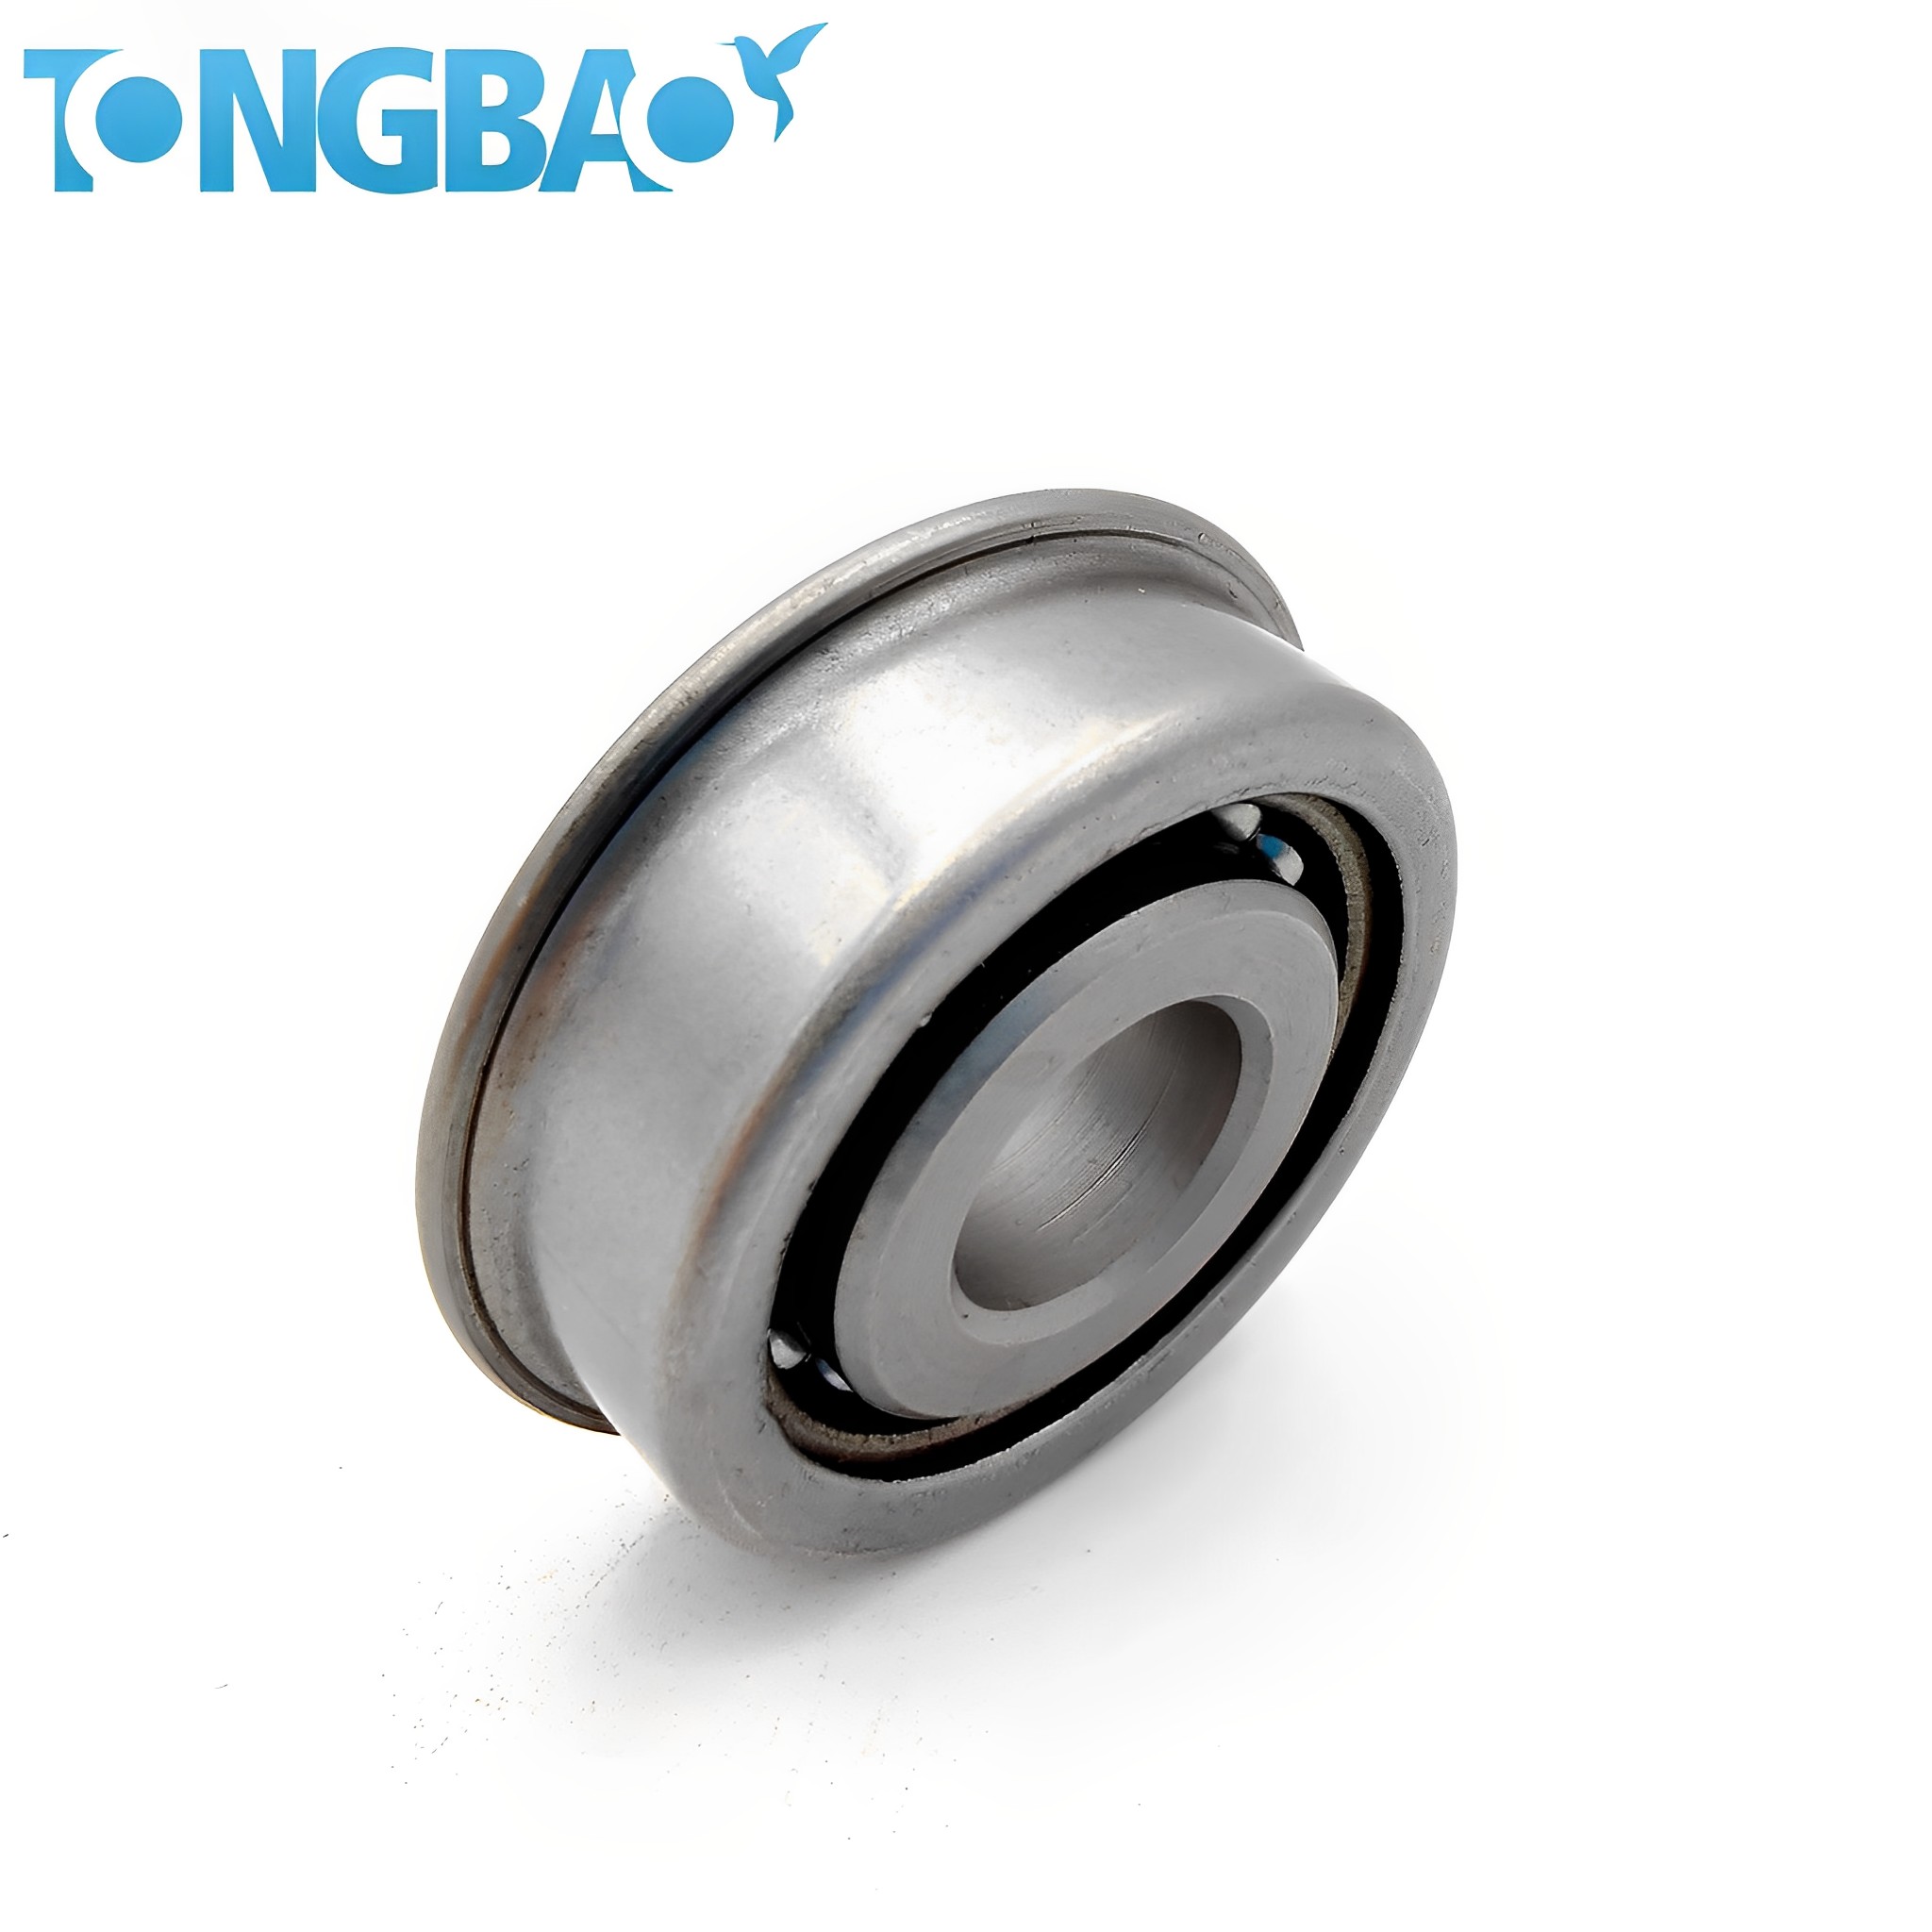 Unground Single Row Ball Bearing Series with Flange